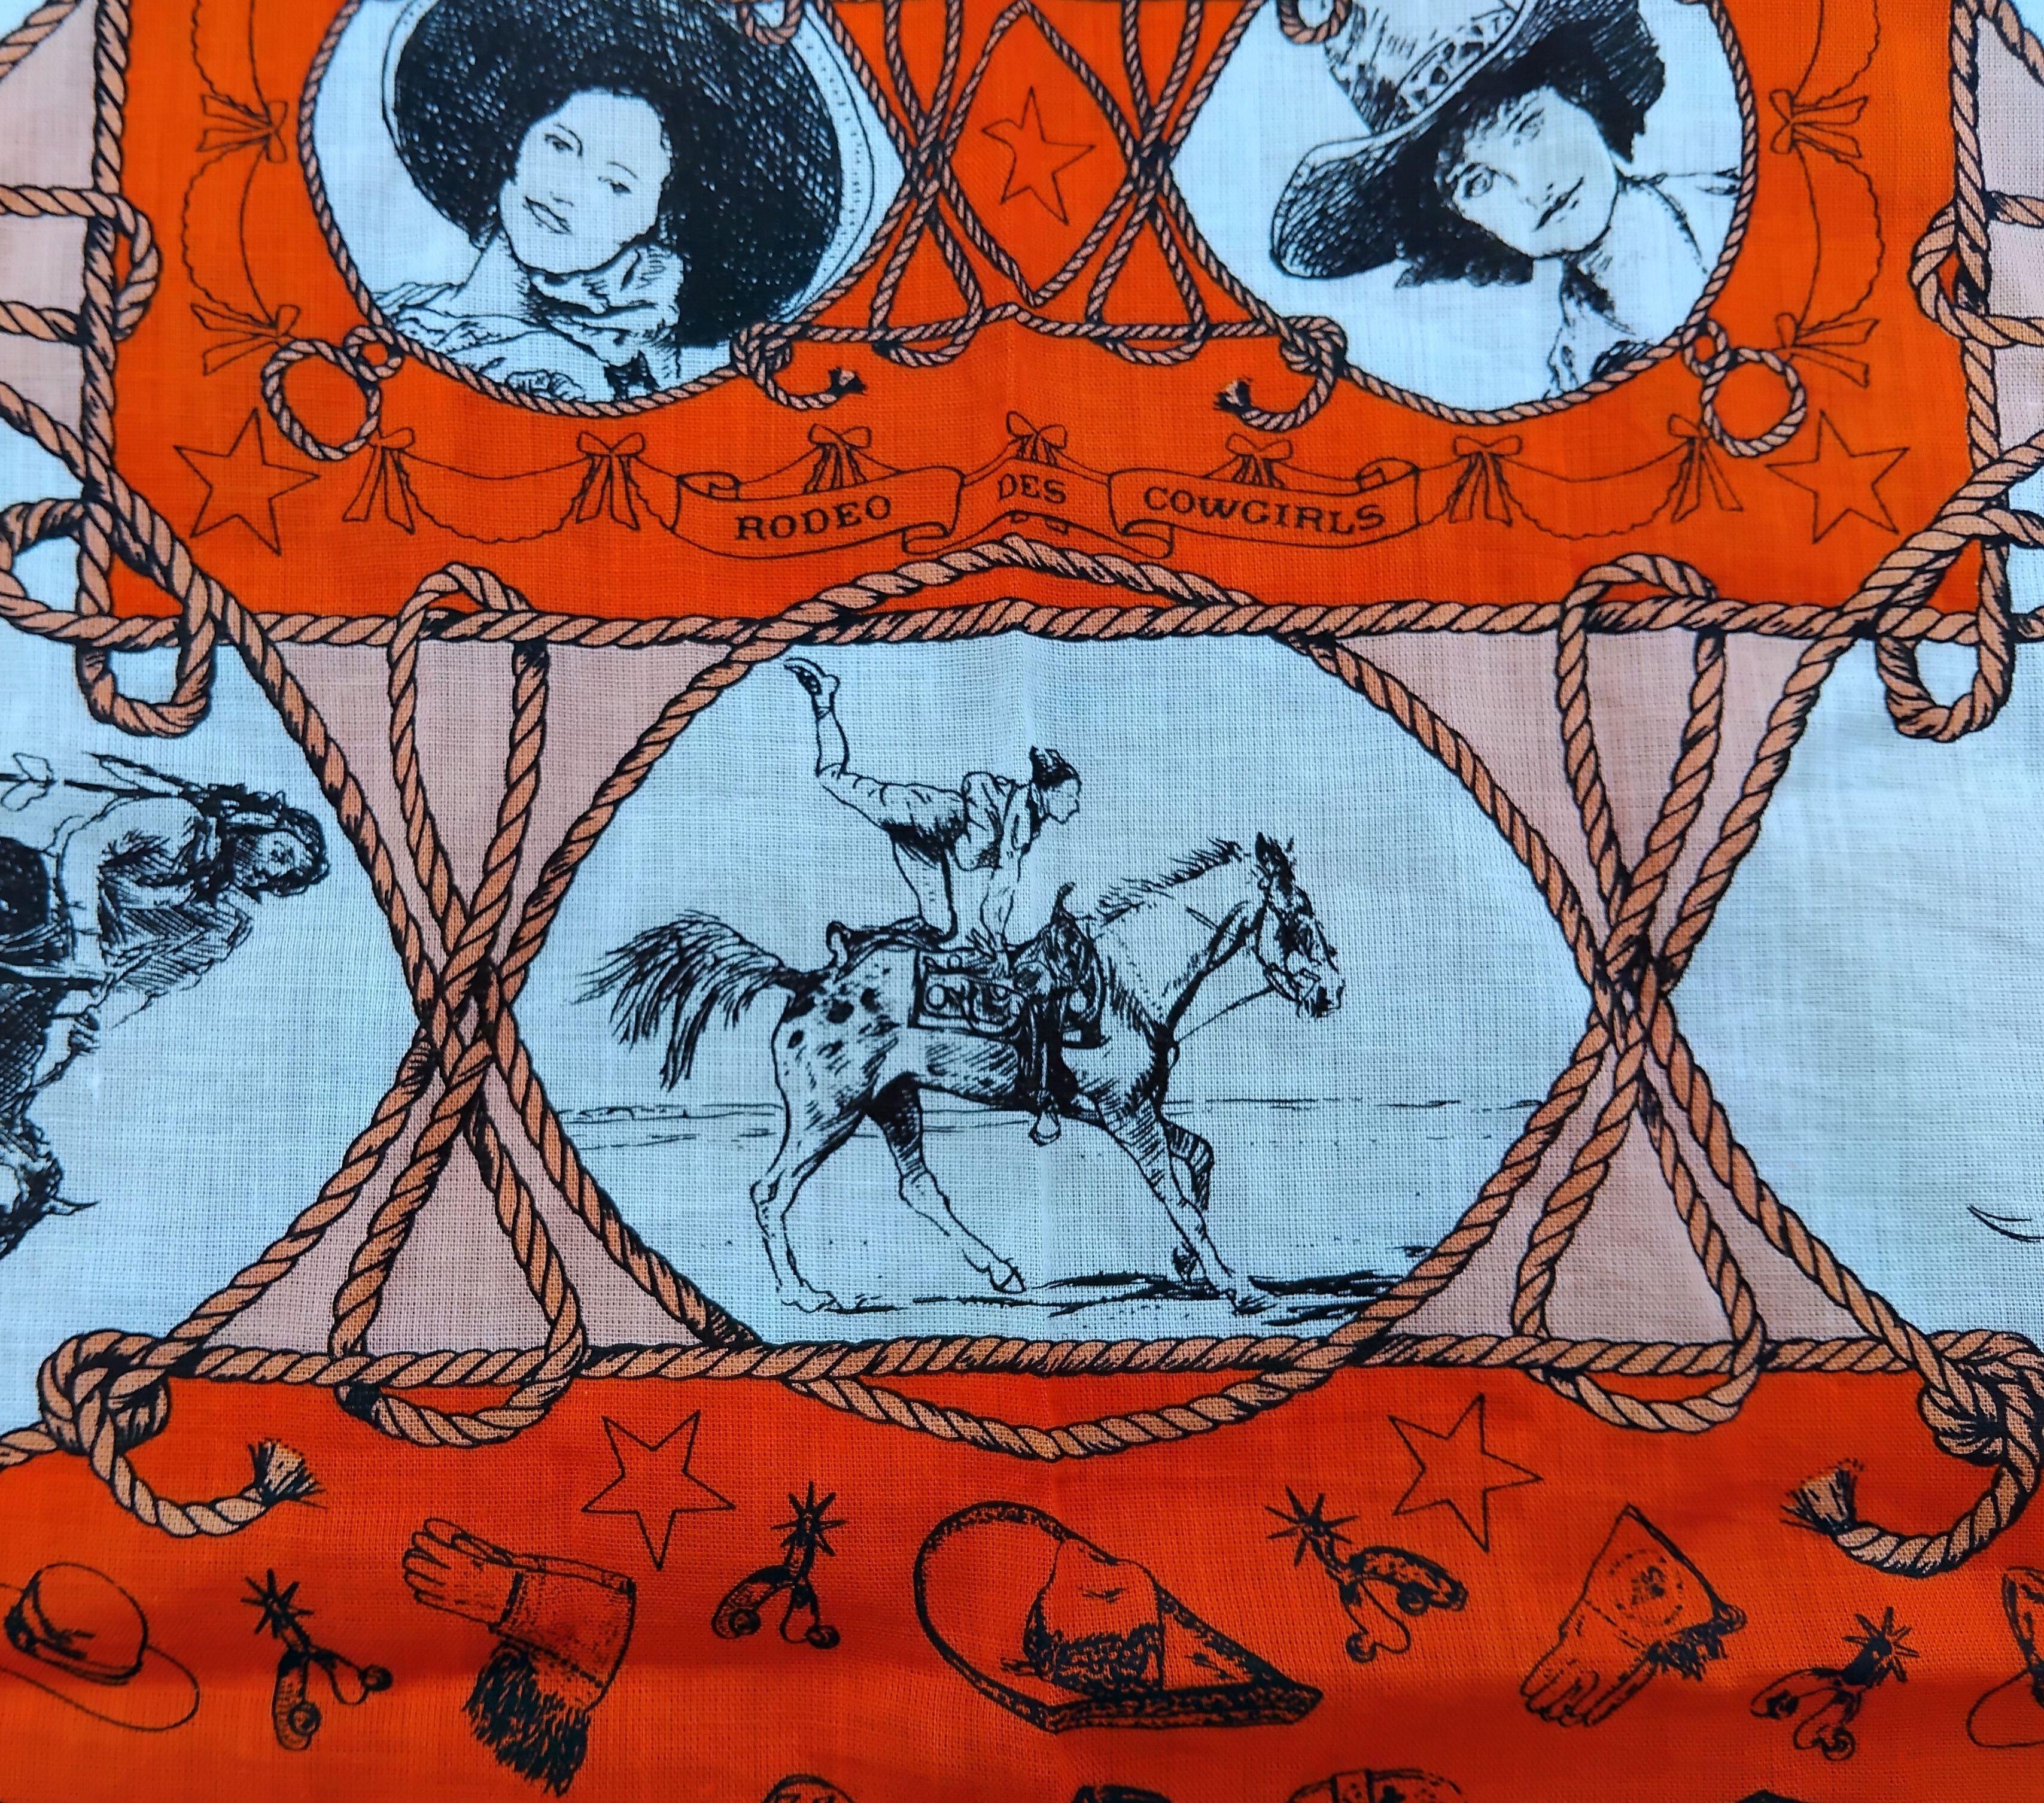 Hermès Cotton Scarf with Charm Rodeo Des Cowgirls Kermit Oliver TEXAS Horse 26' For Sale 5